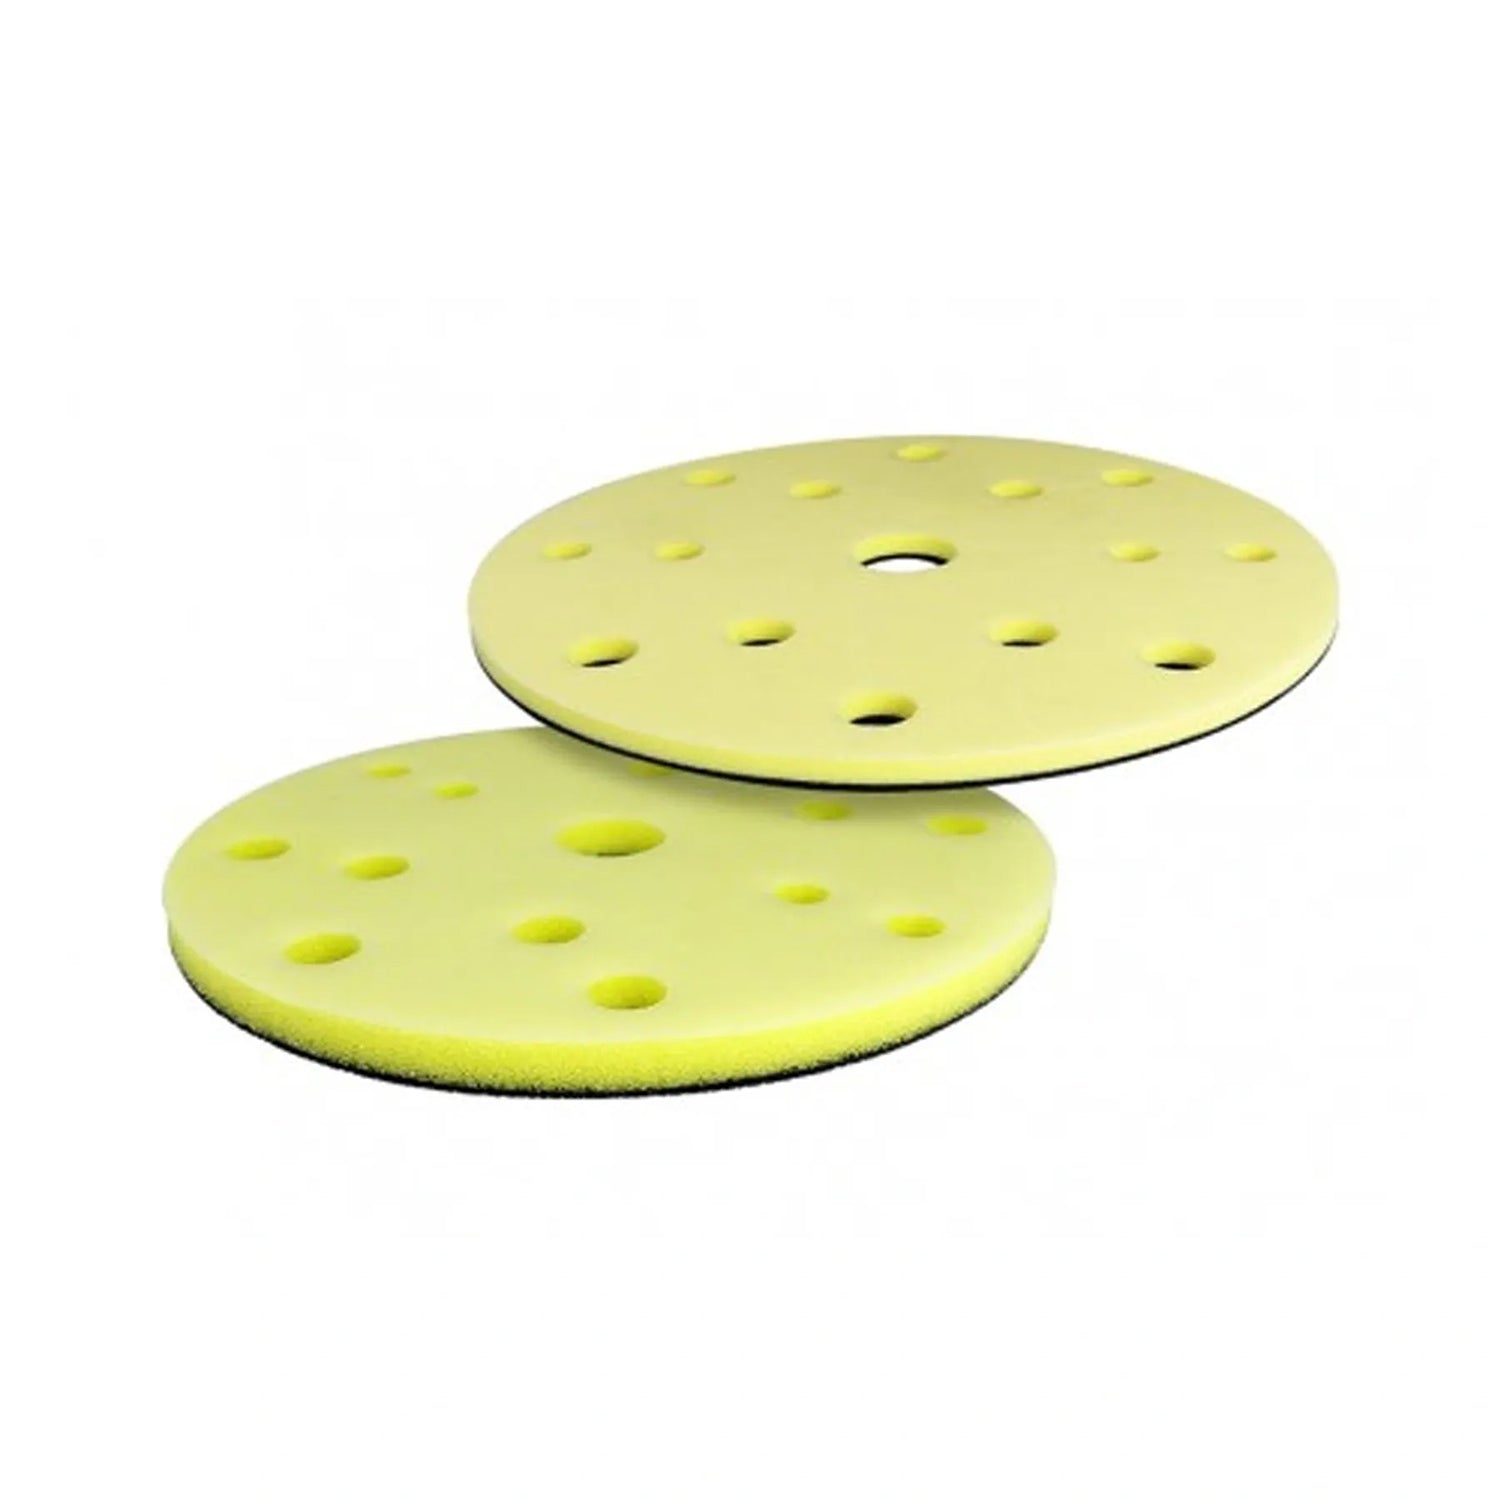 6-inch-and-15-hole-assilex-interface-pads